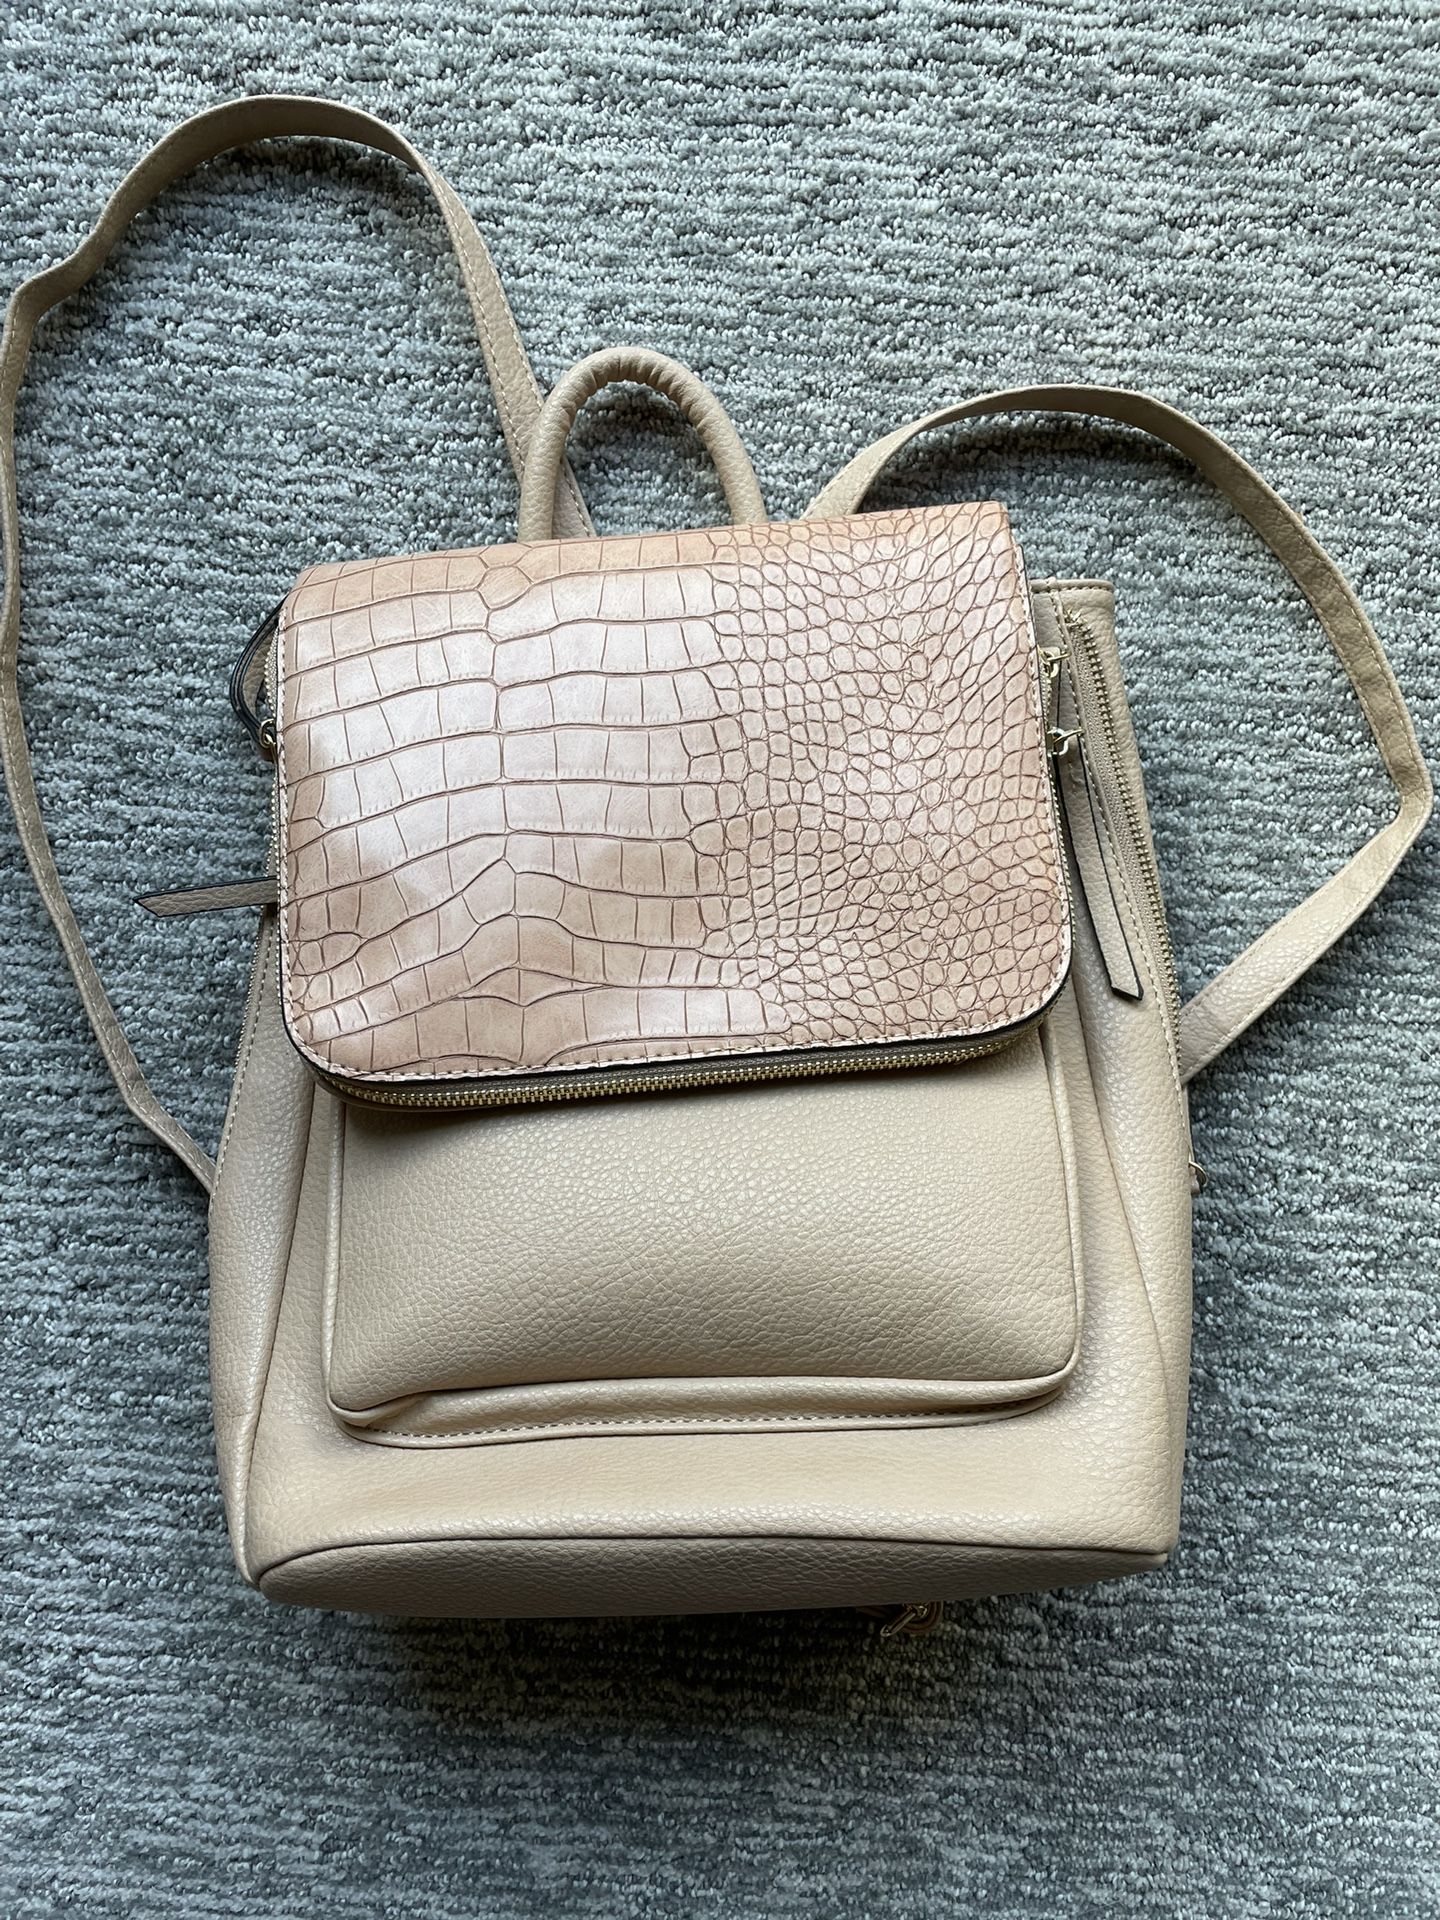 Buckle Beige Fashion Backpack New Without Tags